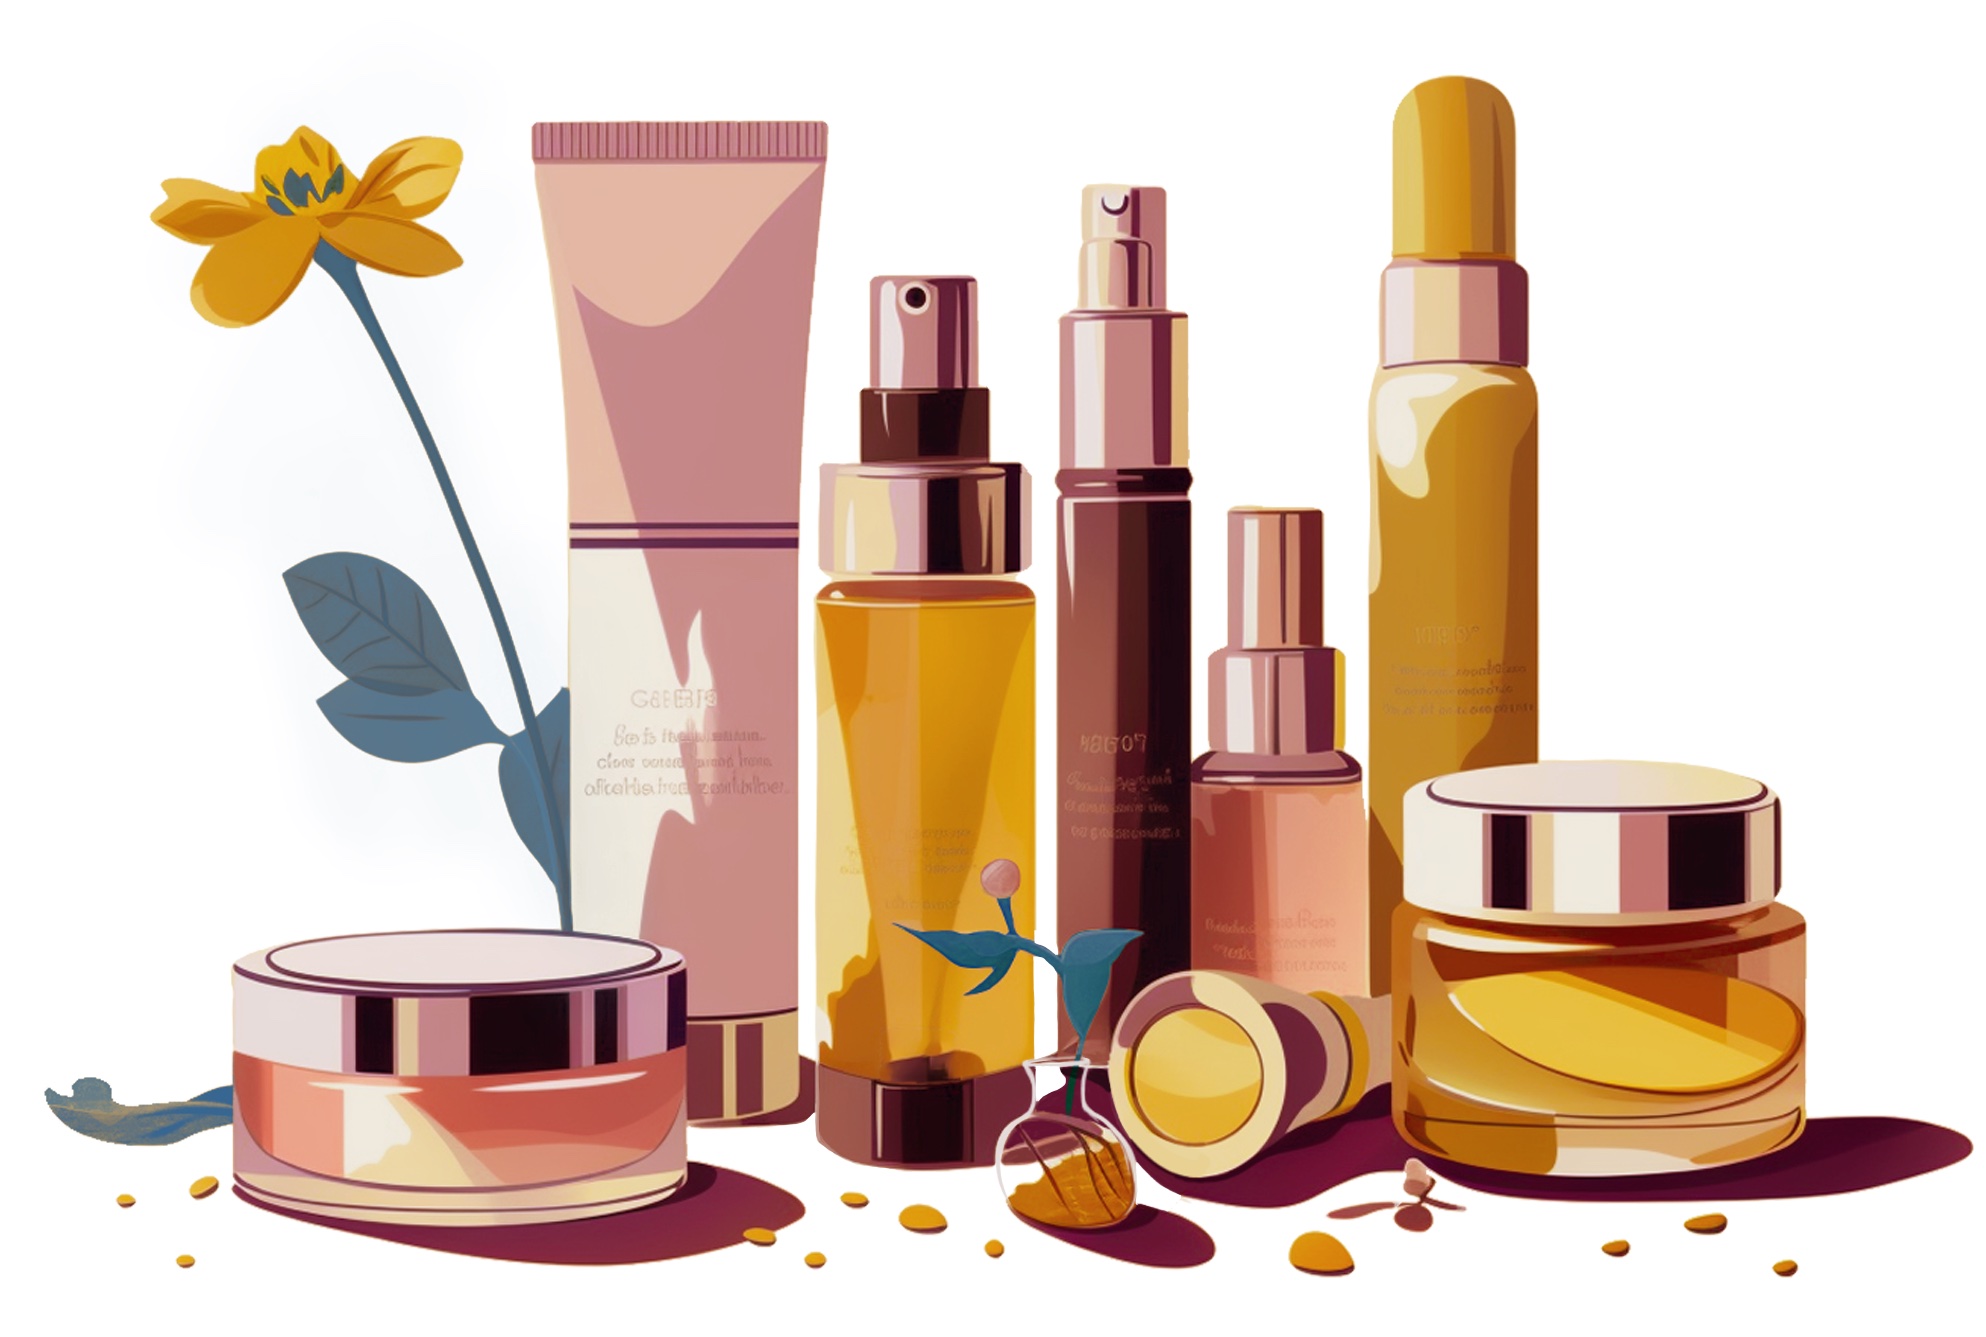 Zents_Cosmetic Product Illustration